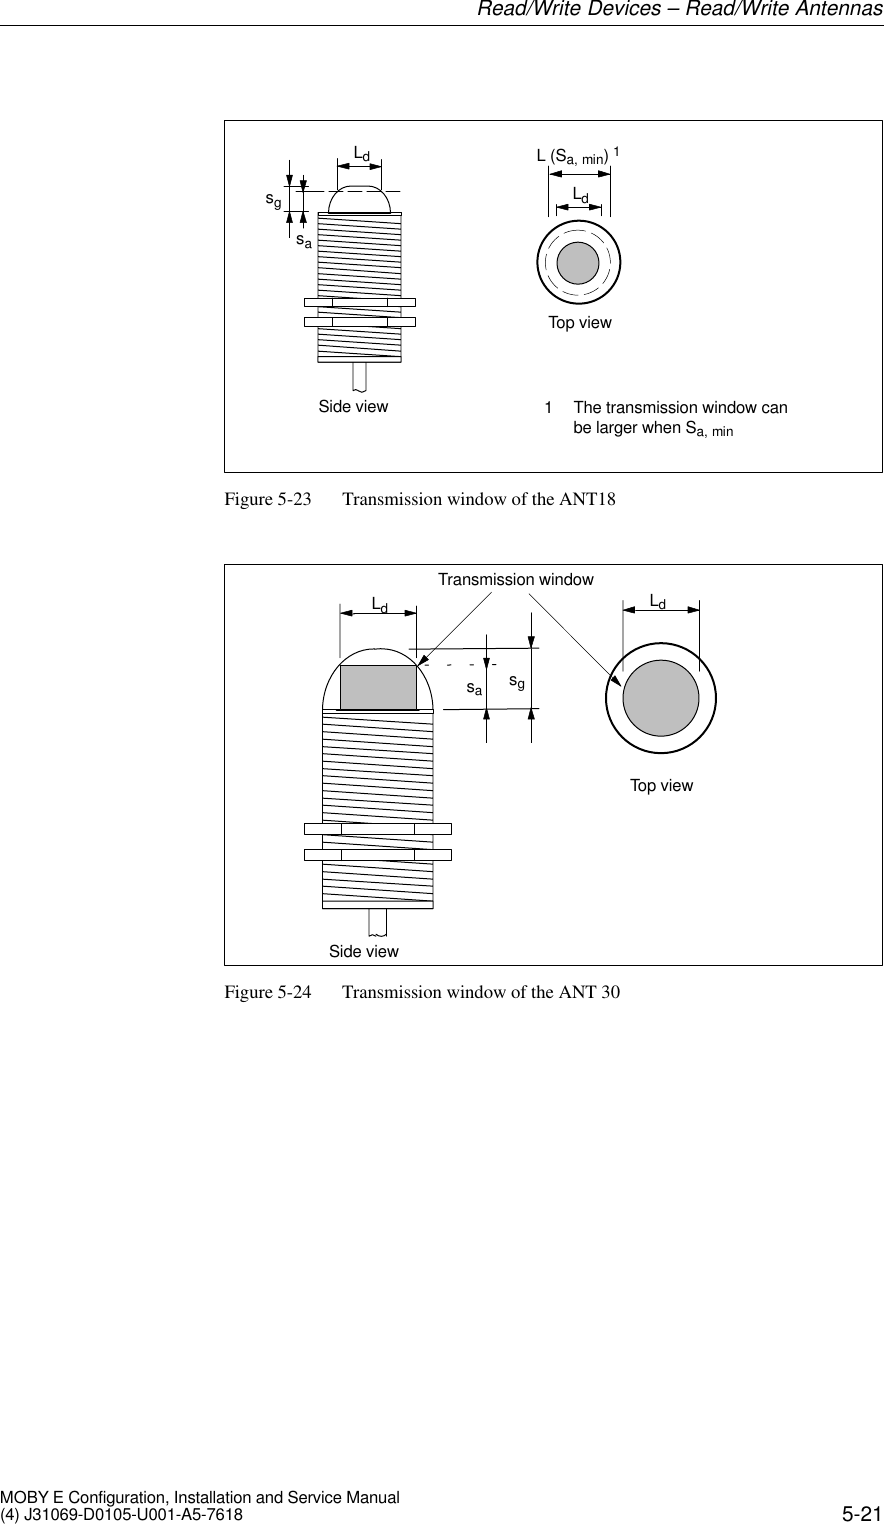 5-21MOBY E Configuration, Installation and Service Manual(4) J31069-D0105-U001-A5-7618LdTop viewLdsgsaSide view 1 The transmission window canbe larger when Sa, minL (Sa, min)1Figure 5-23 Transmission window of the ANT18LdTop viewsgsaSide viewLdTransmission windowFigure 5-24 Transmission window of the ANT 30Read/Write Devices – Read/Write Antennas